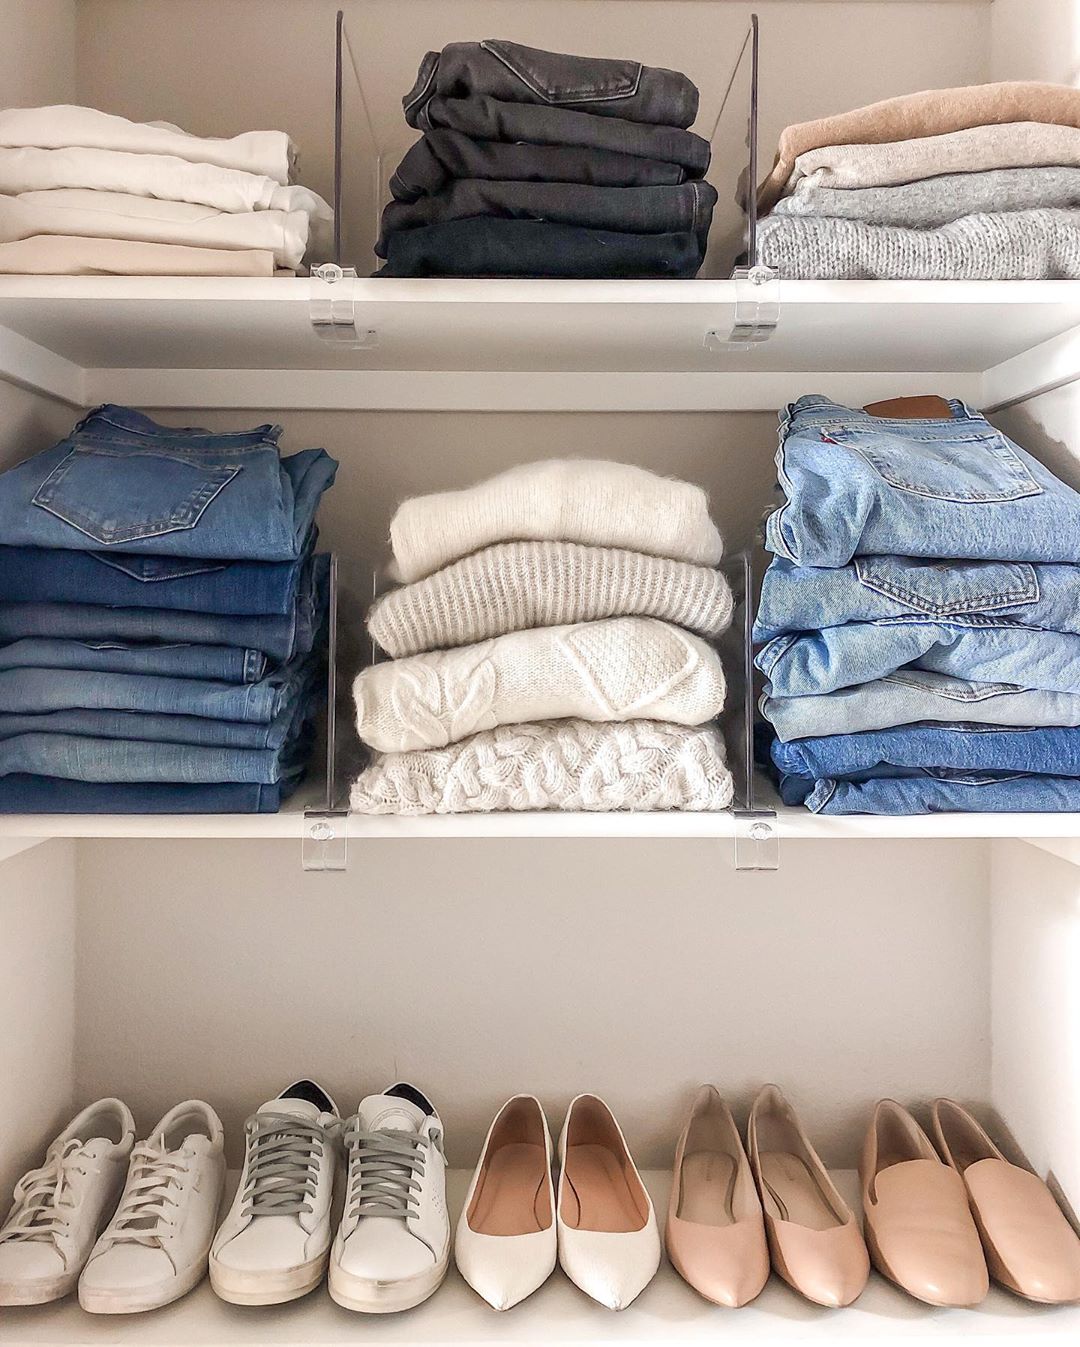 Sweaters and jeans folded on shelves. Photo by Instagrma user @girlmeetsgold